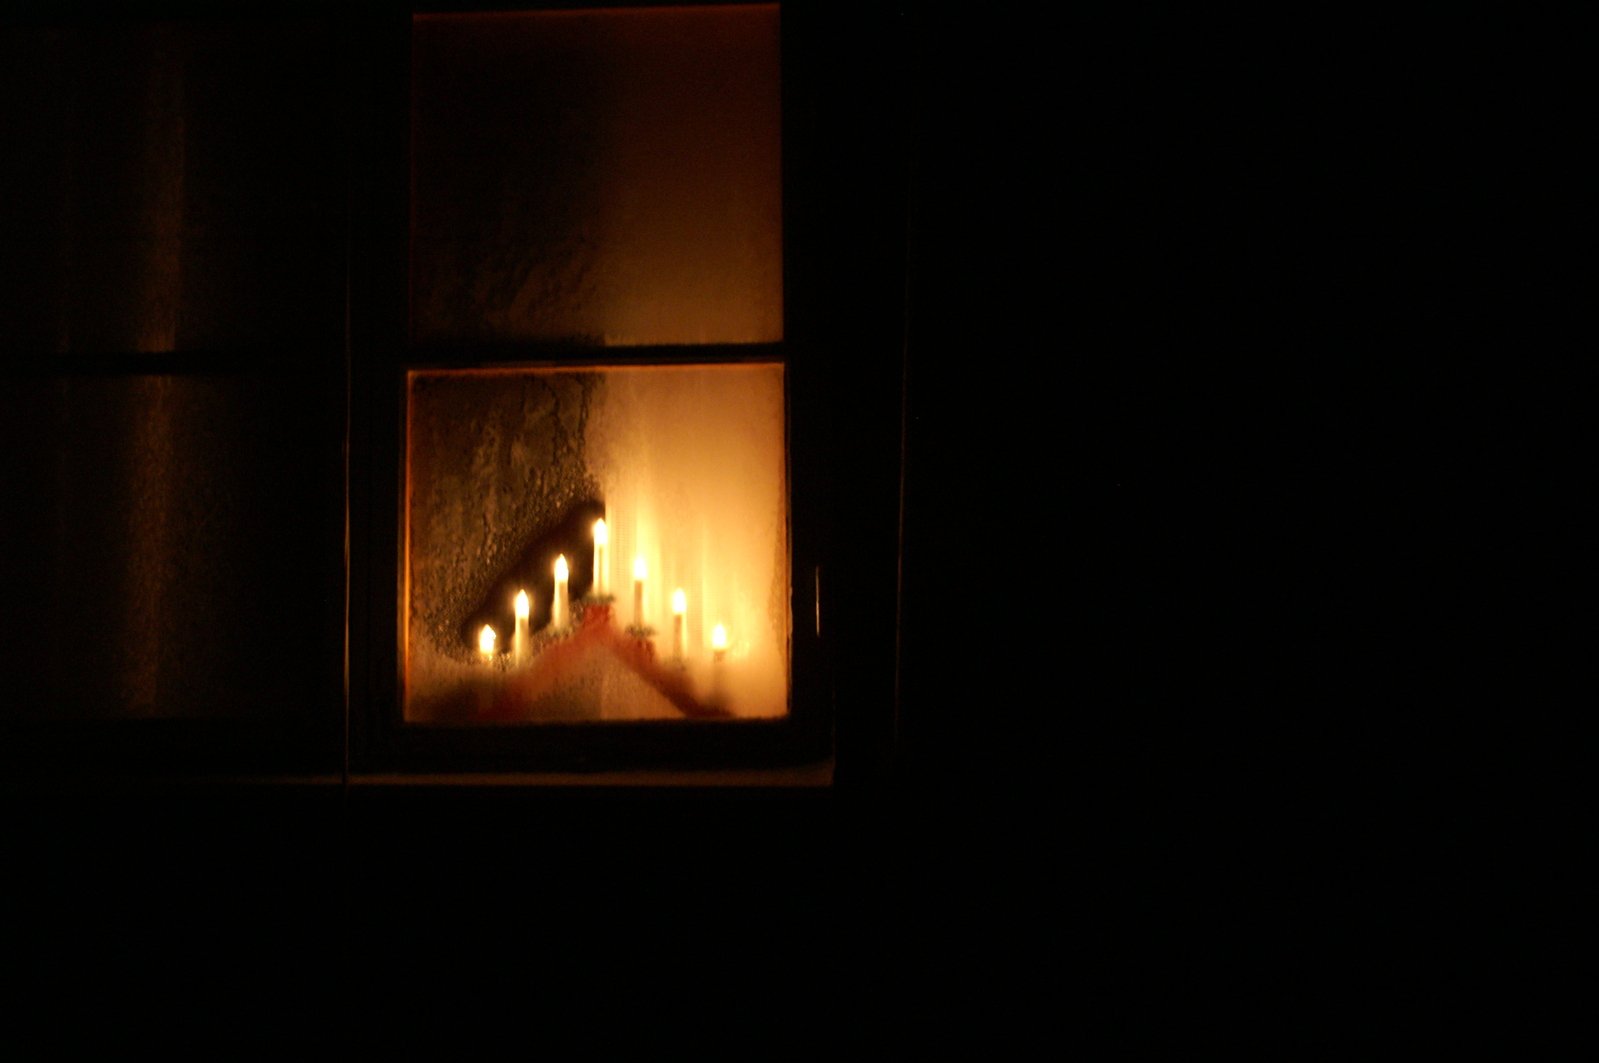 lit candles sitting in an open window at night